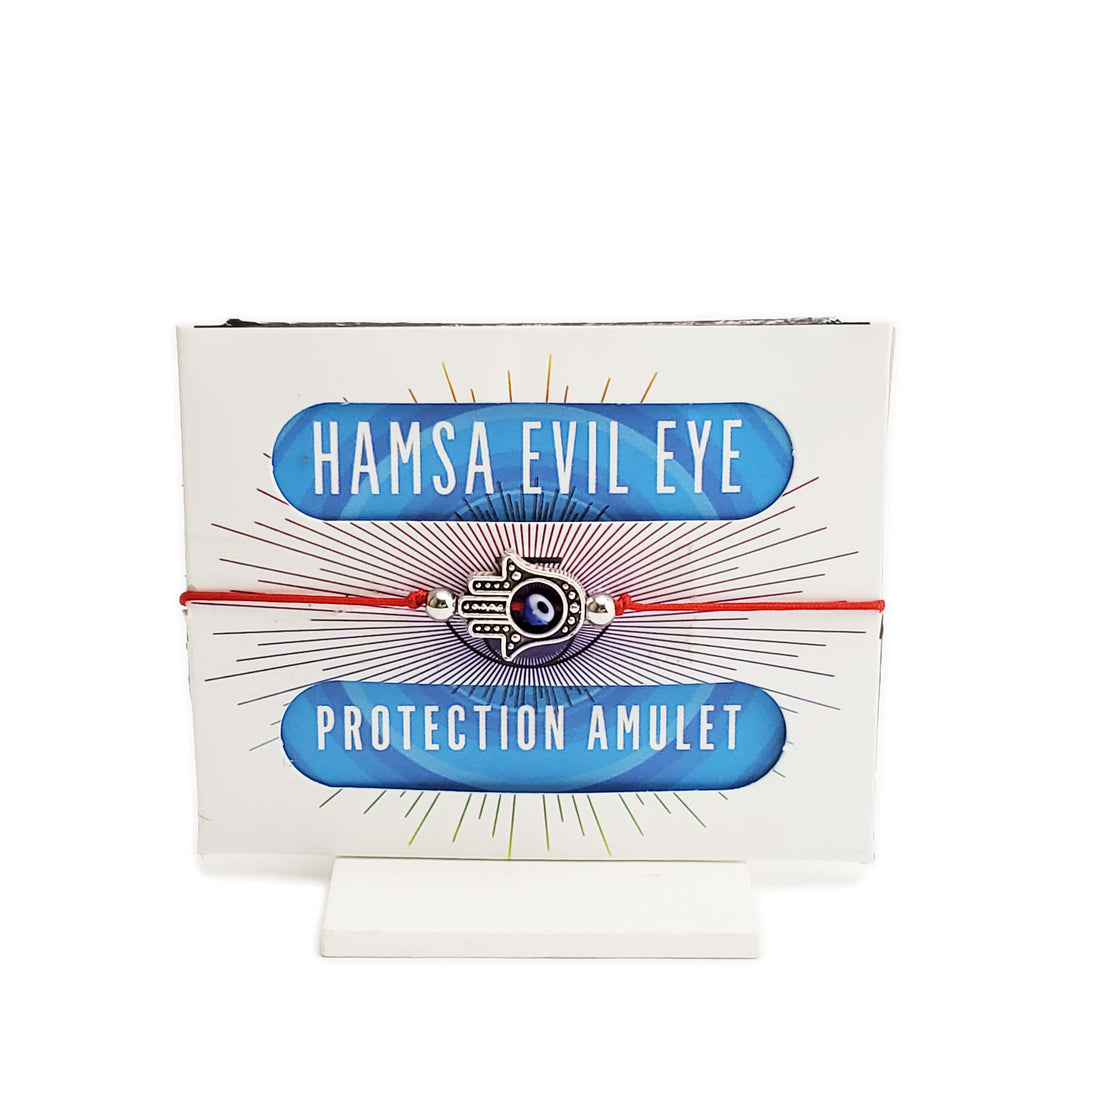 Hamsa Evil Eye Protection Amulet House of Intuition 